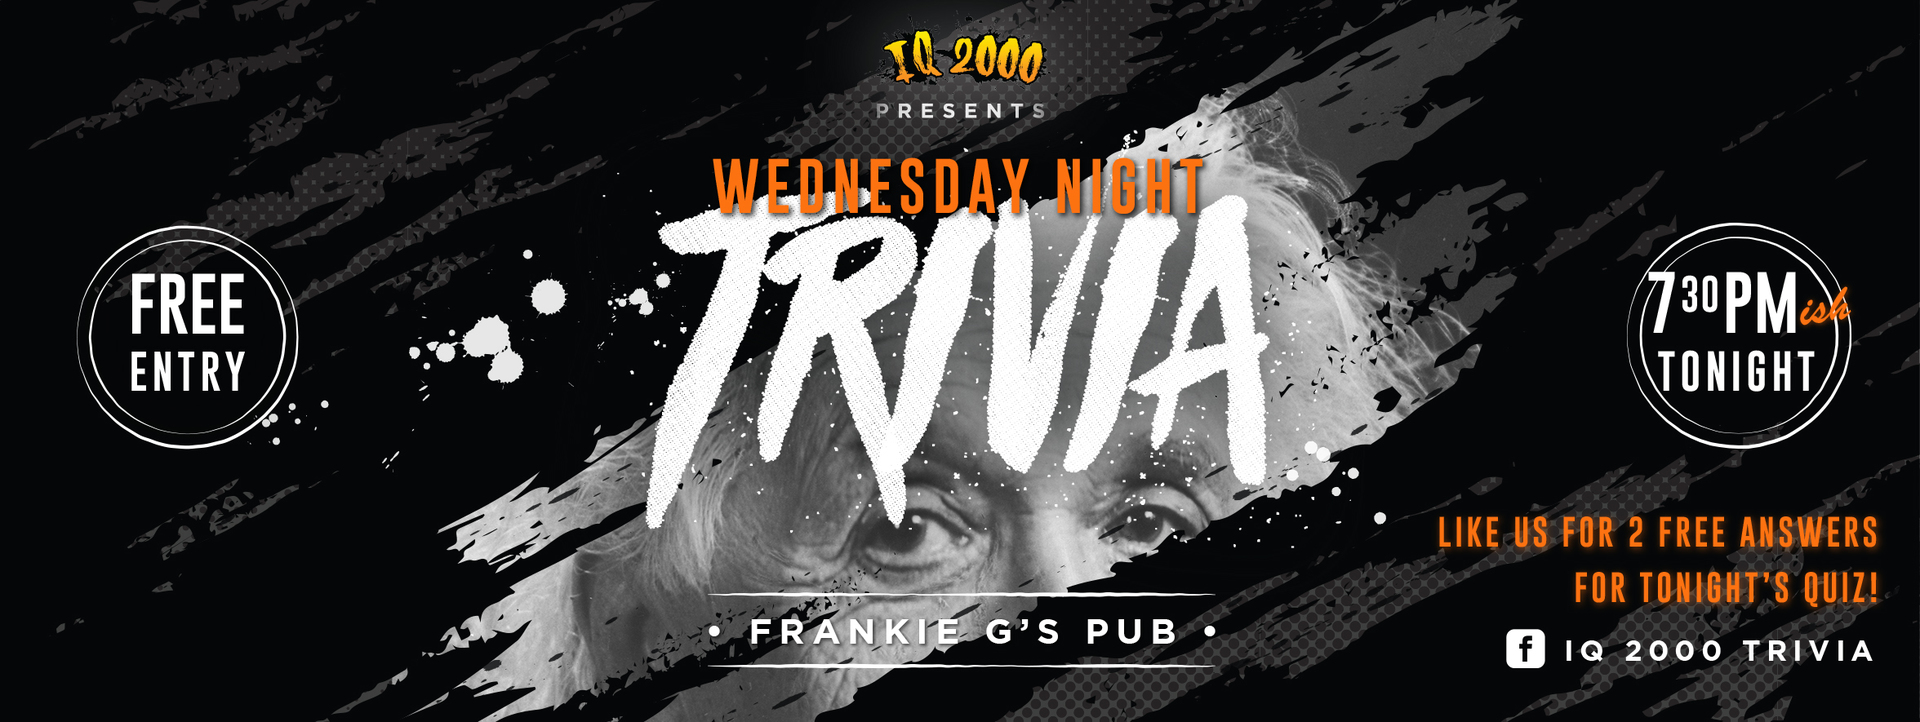 Wednesday Night Trivia at Frankie G's Pub, New Westminster, British Columbia, Canada